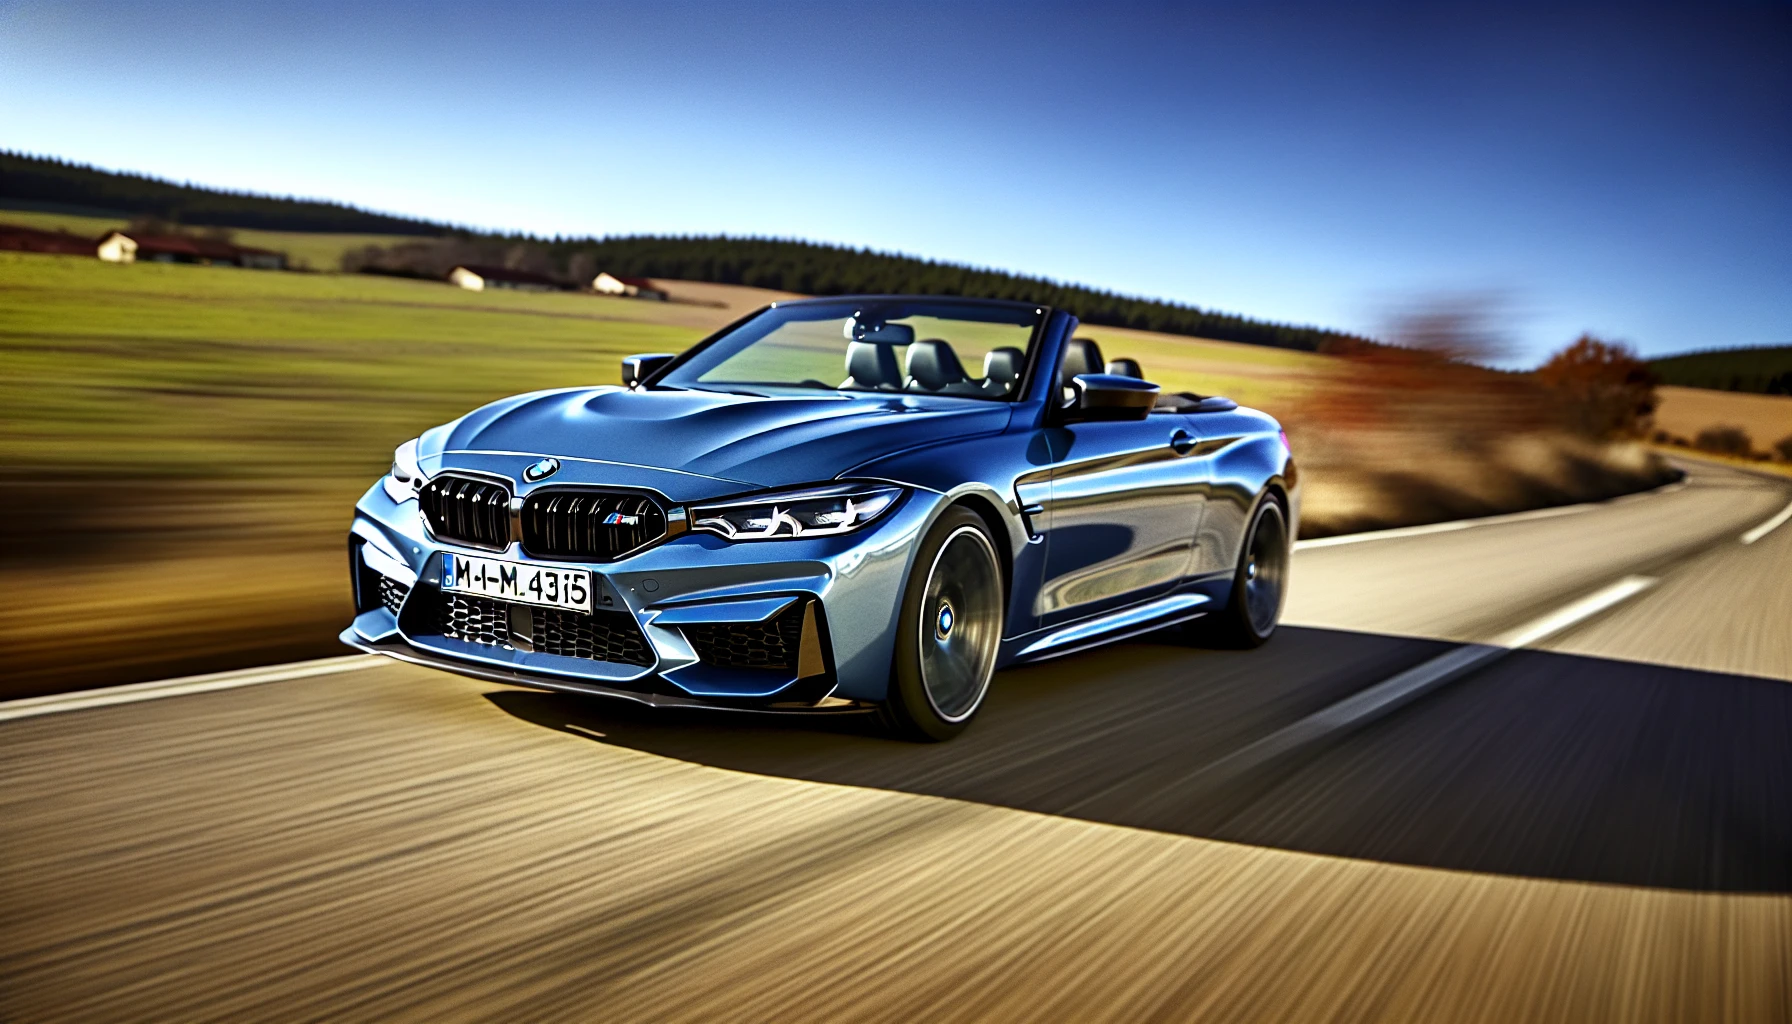 The BMW M4 Competition convertible in action